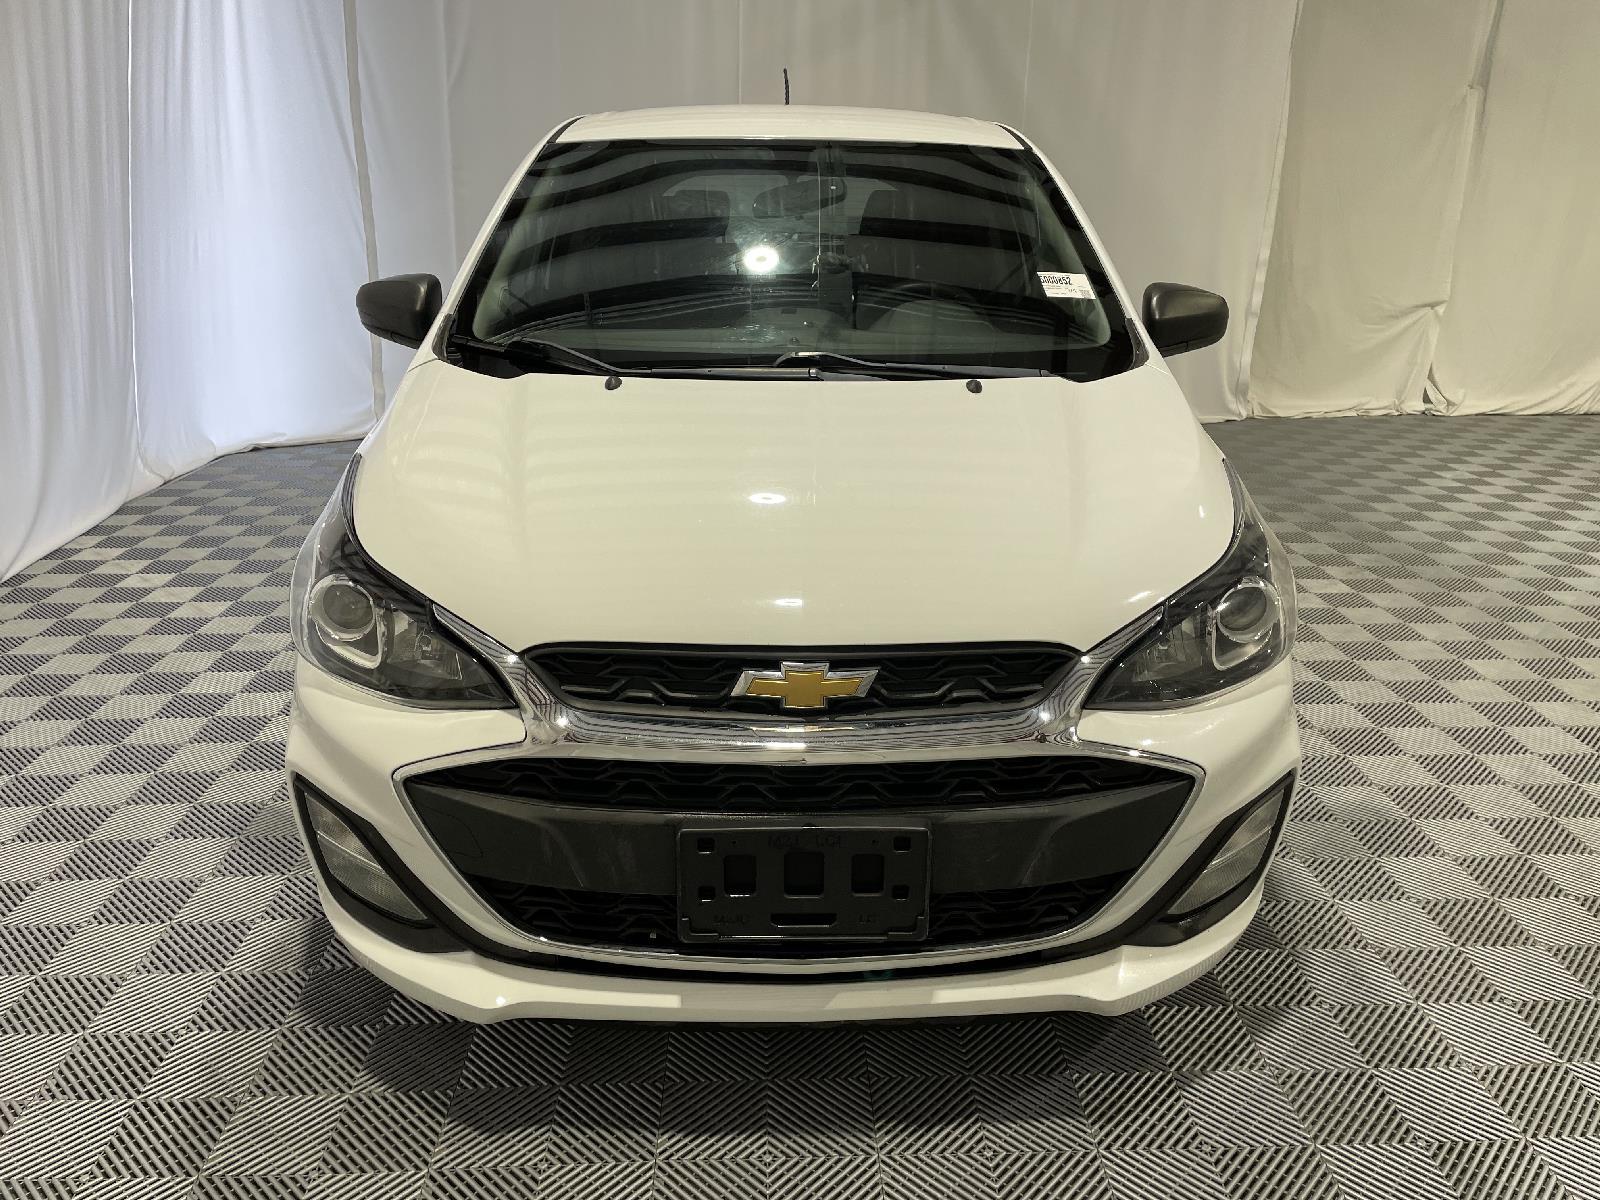 Used 2019 Chevrolet Spark LS Hatchback for sale in St Joseph MO